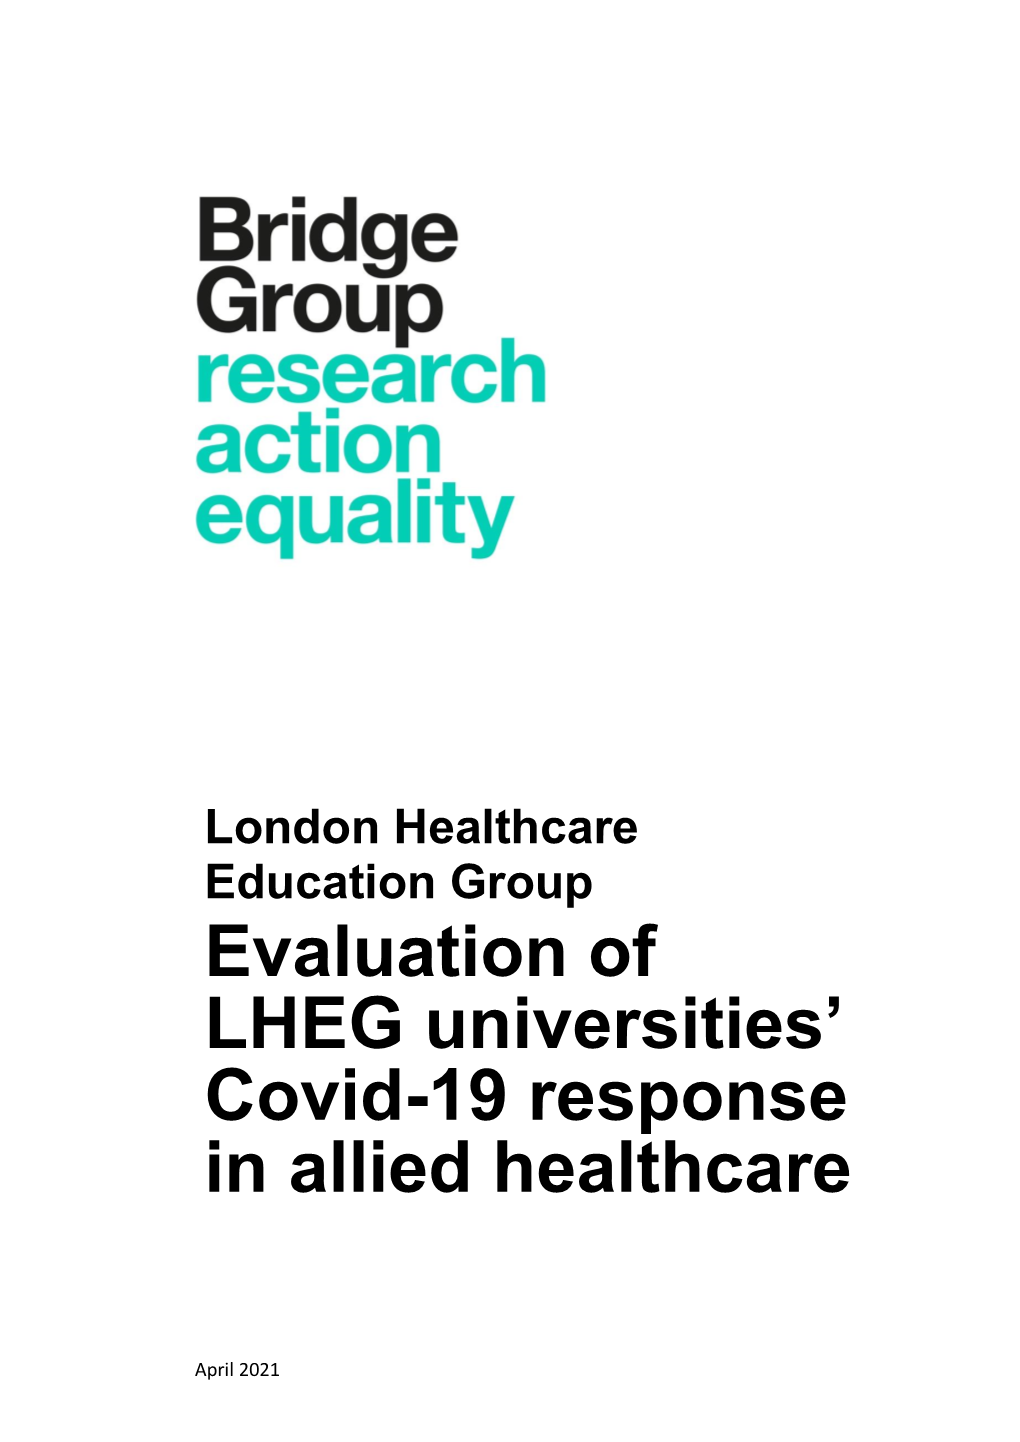 Evaluation of LHEG Universities' Covid-19 Response in Allied Healthcare